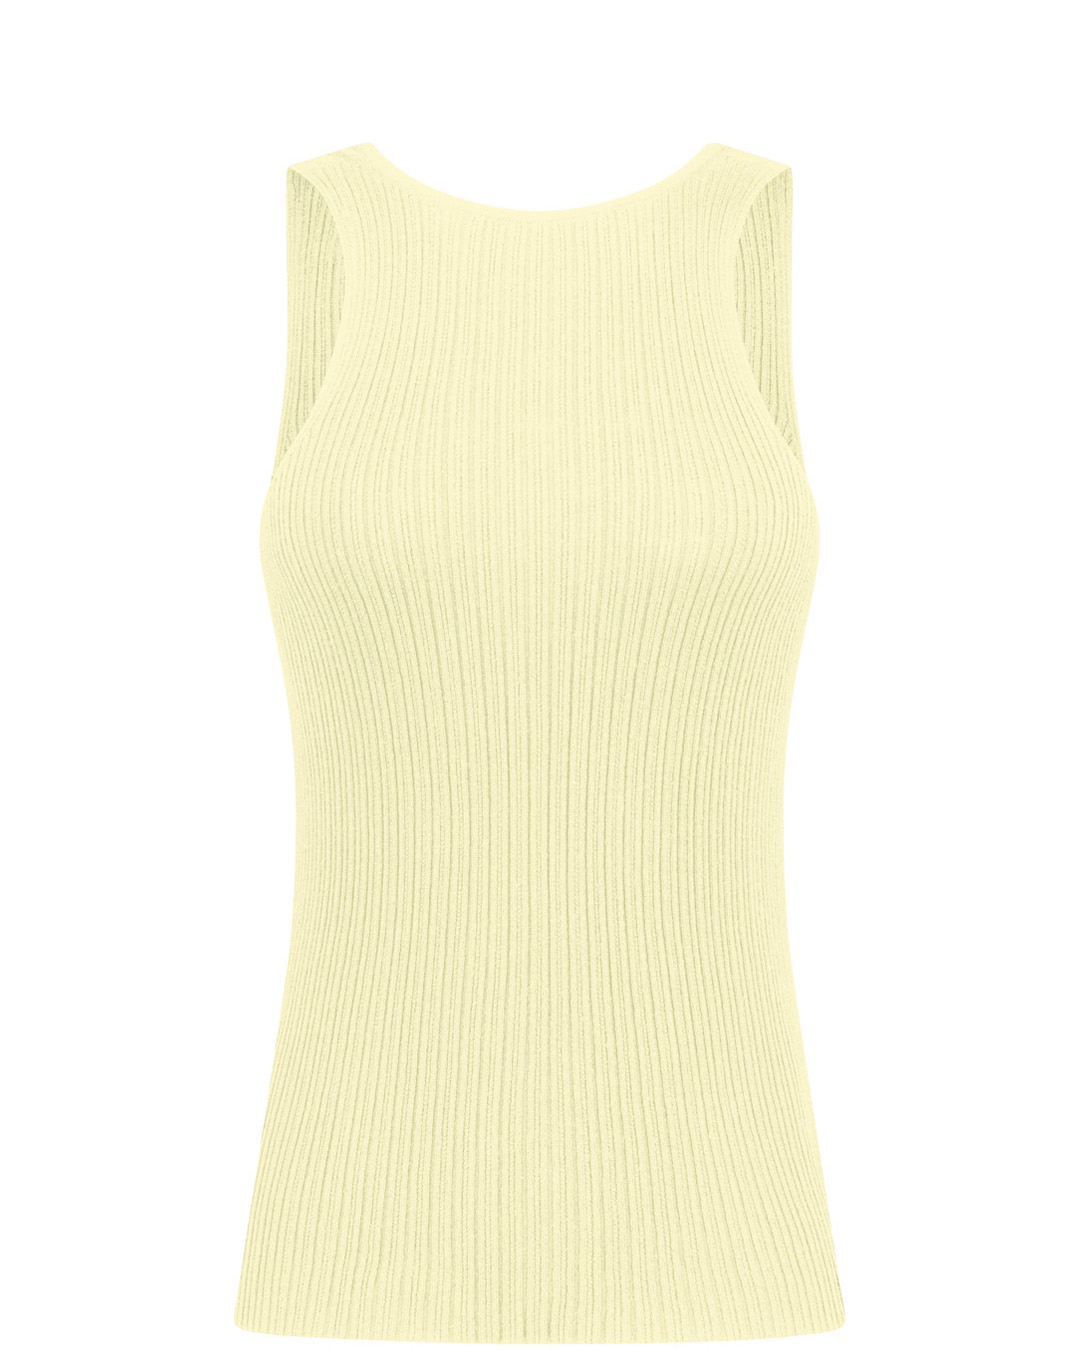 RIBBED TANK TOP IN COTTON